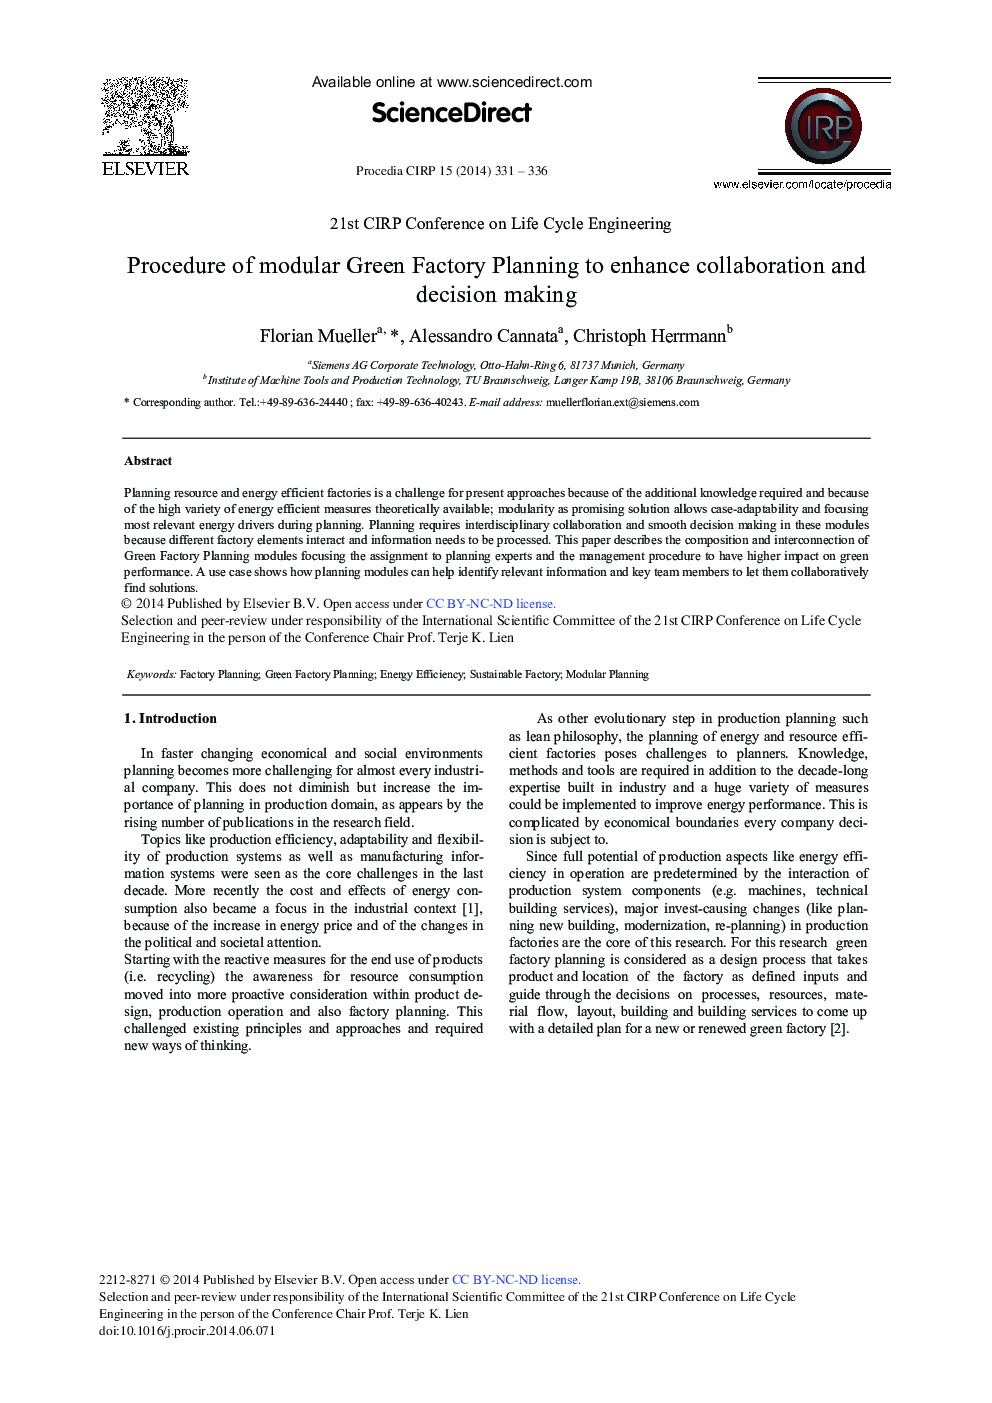 Procedure of Modular Green Factory Planning to Enhance Collaboration and Decision Making 